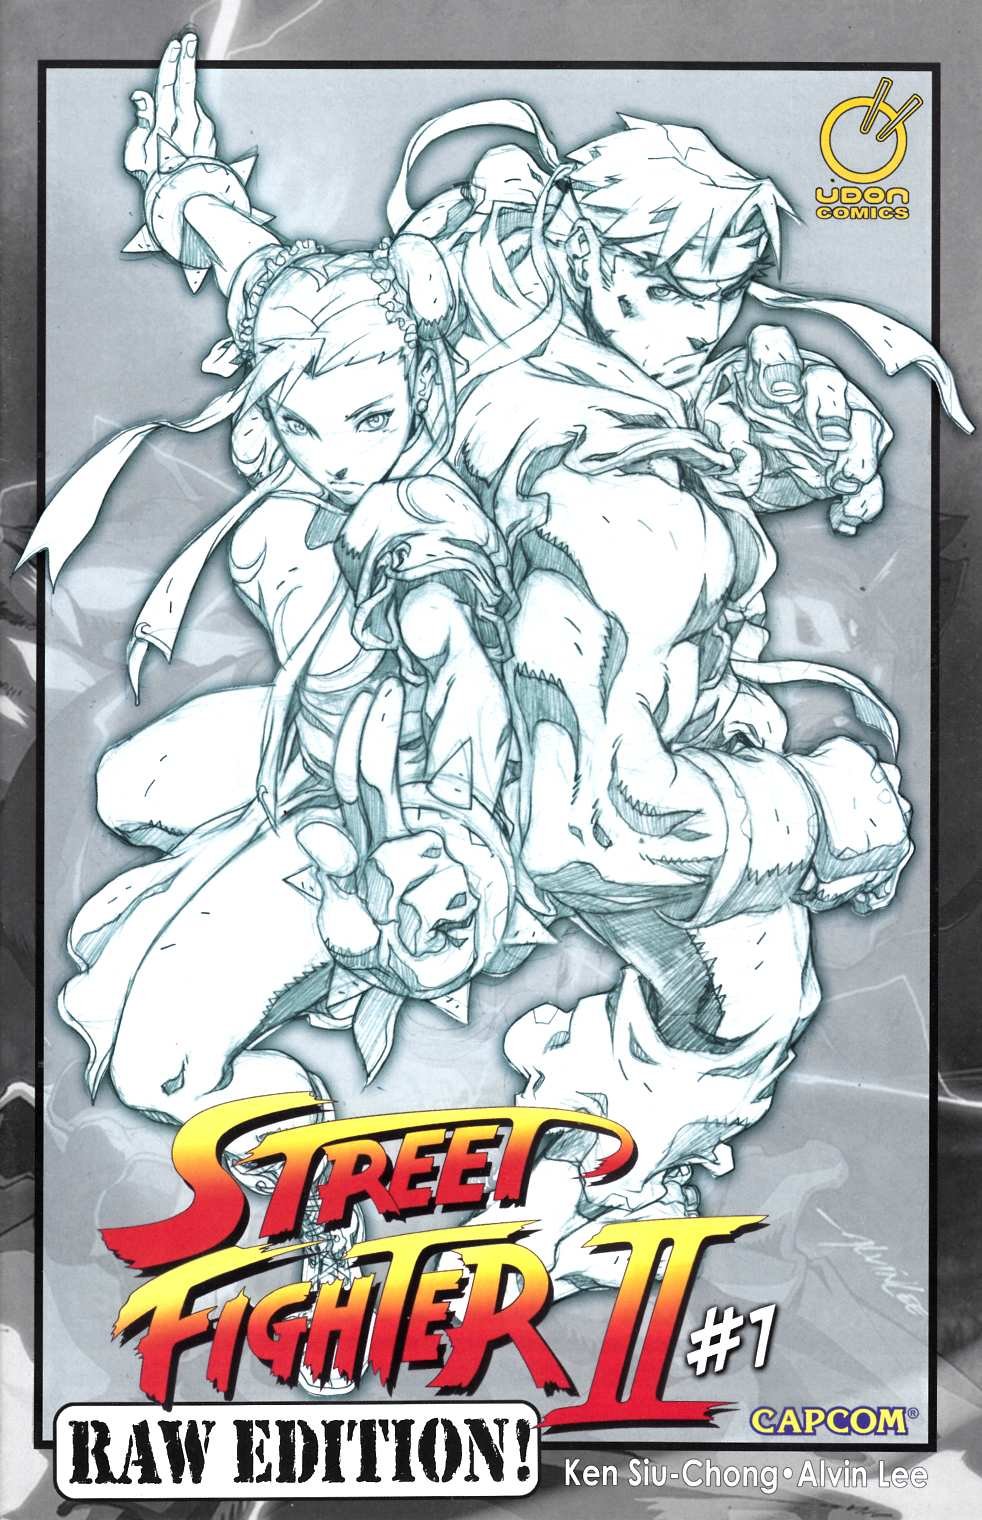 Street Fighter II Issue 1 (November 2005) (Raw Edition)